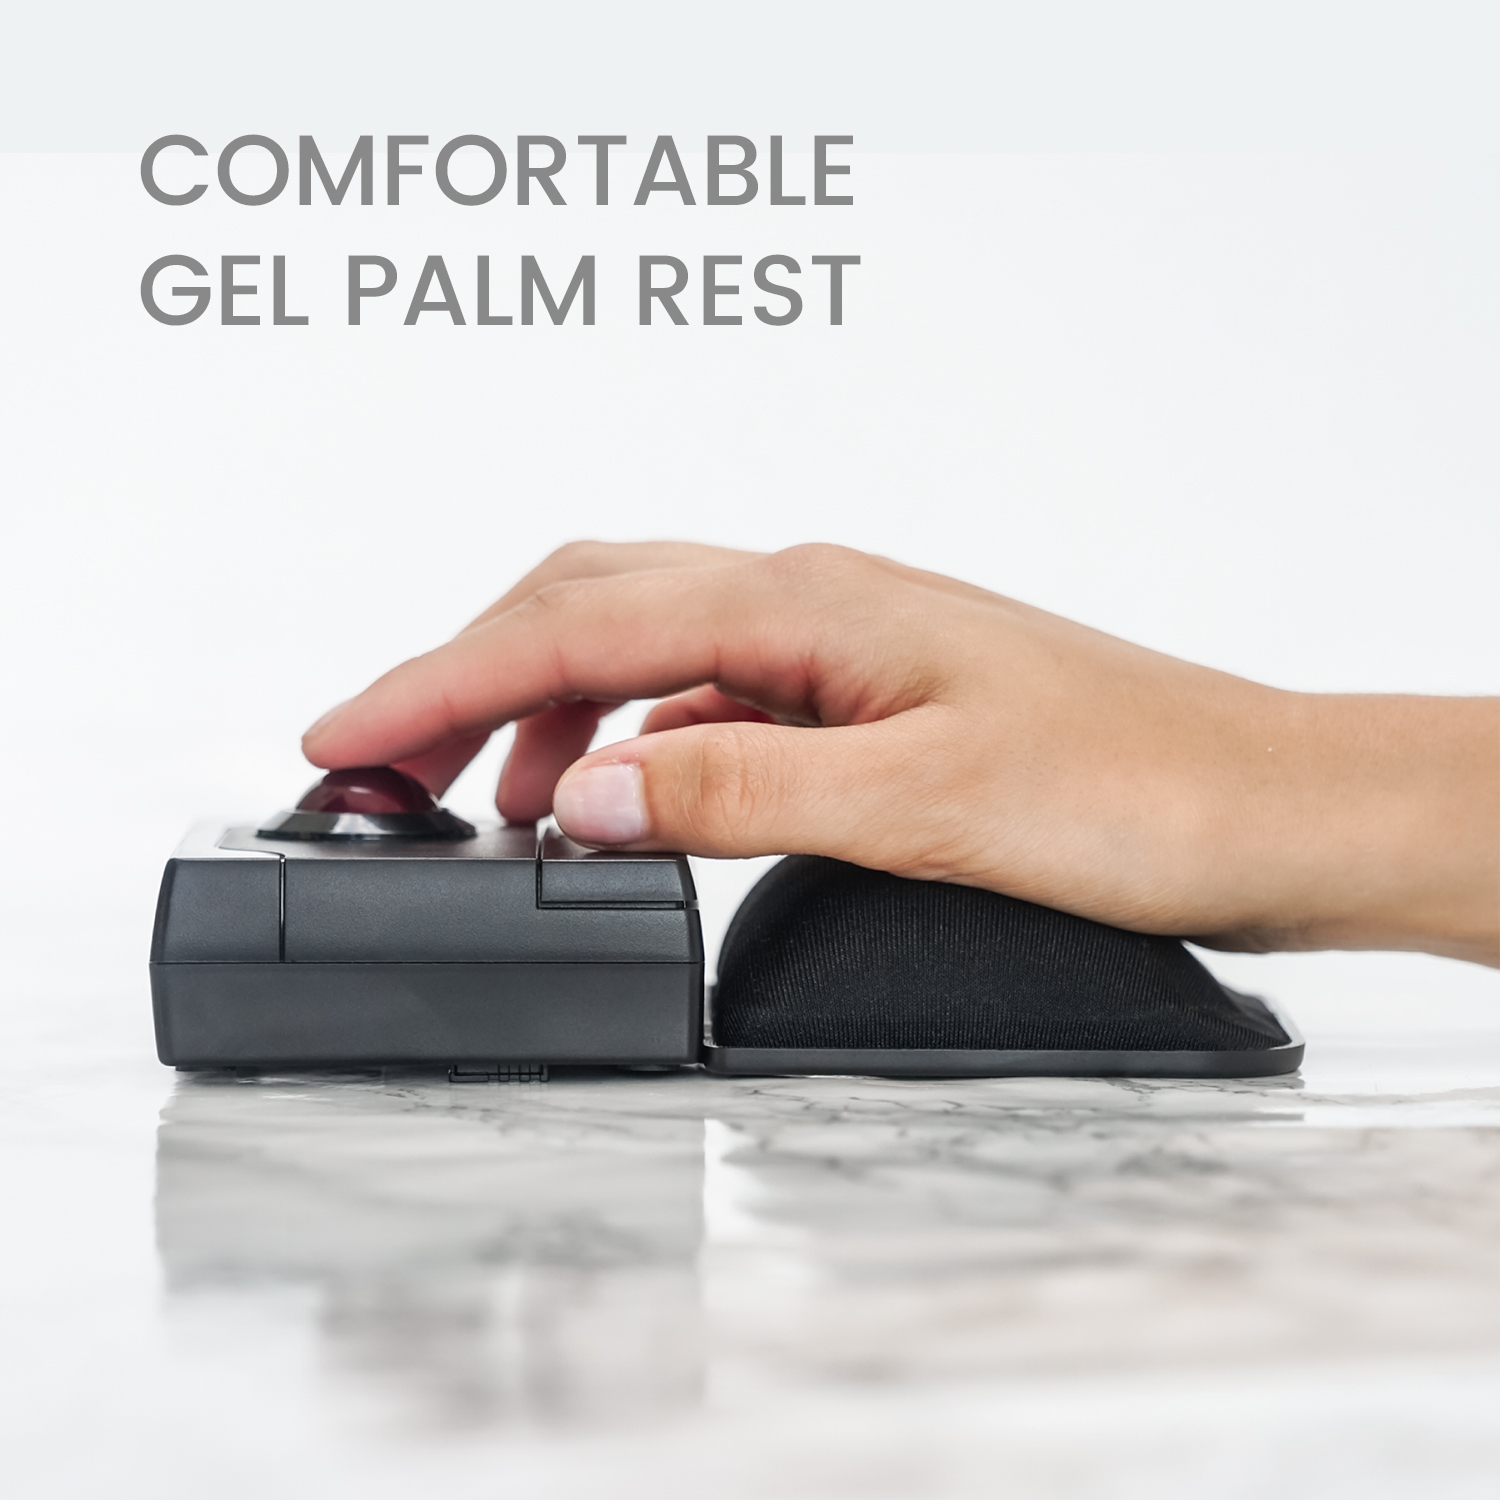 TOTAL PALM AND WRIST SUPPORT